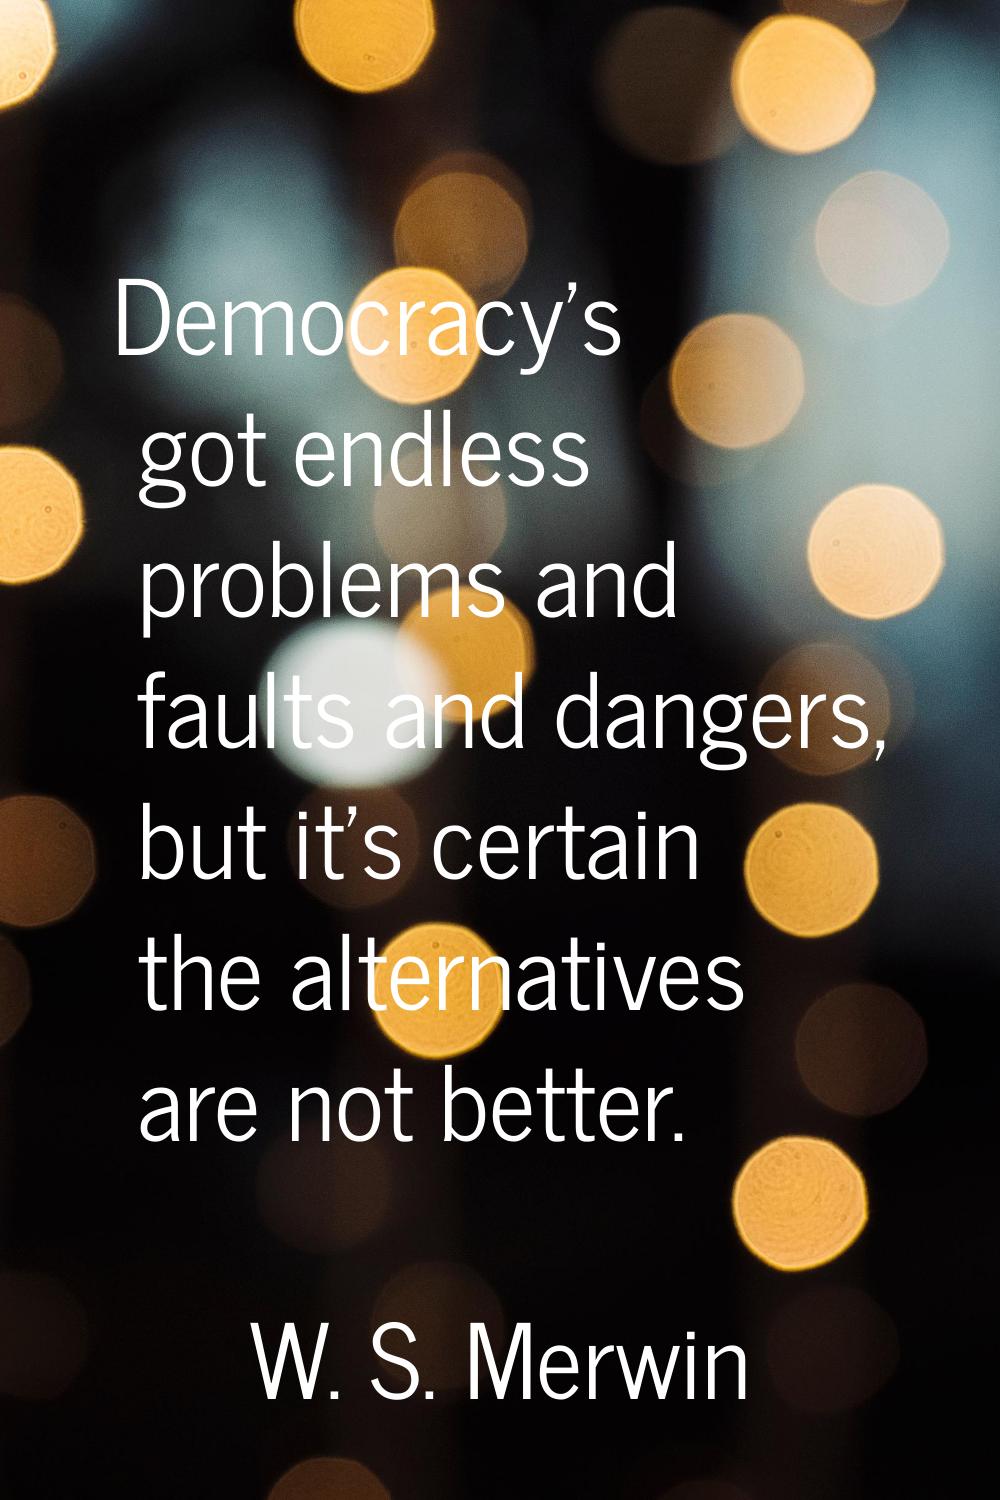 Democracy's got endless problems and faults and dangers, but it's certain the alternatives are not 